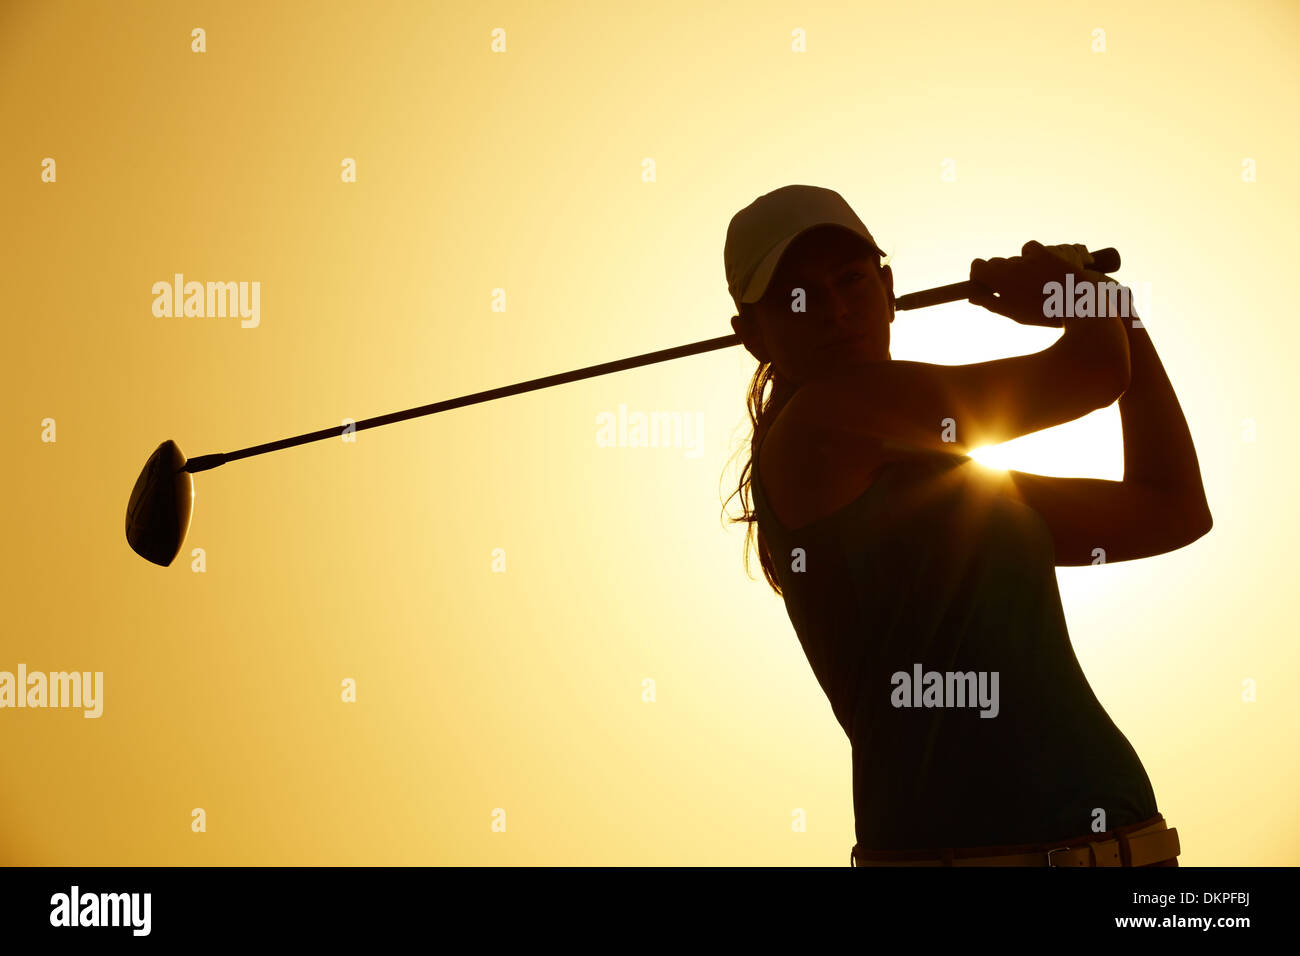 Silhouette of woman playing golf on course Banque D'Images